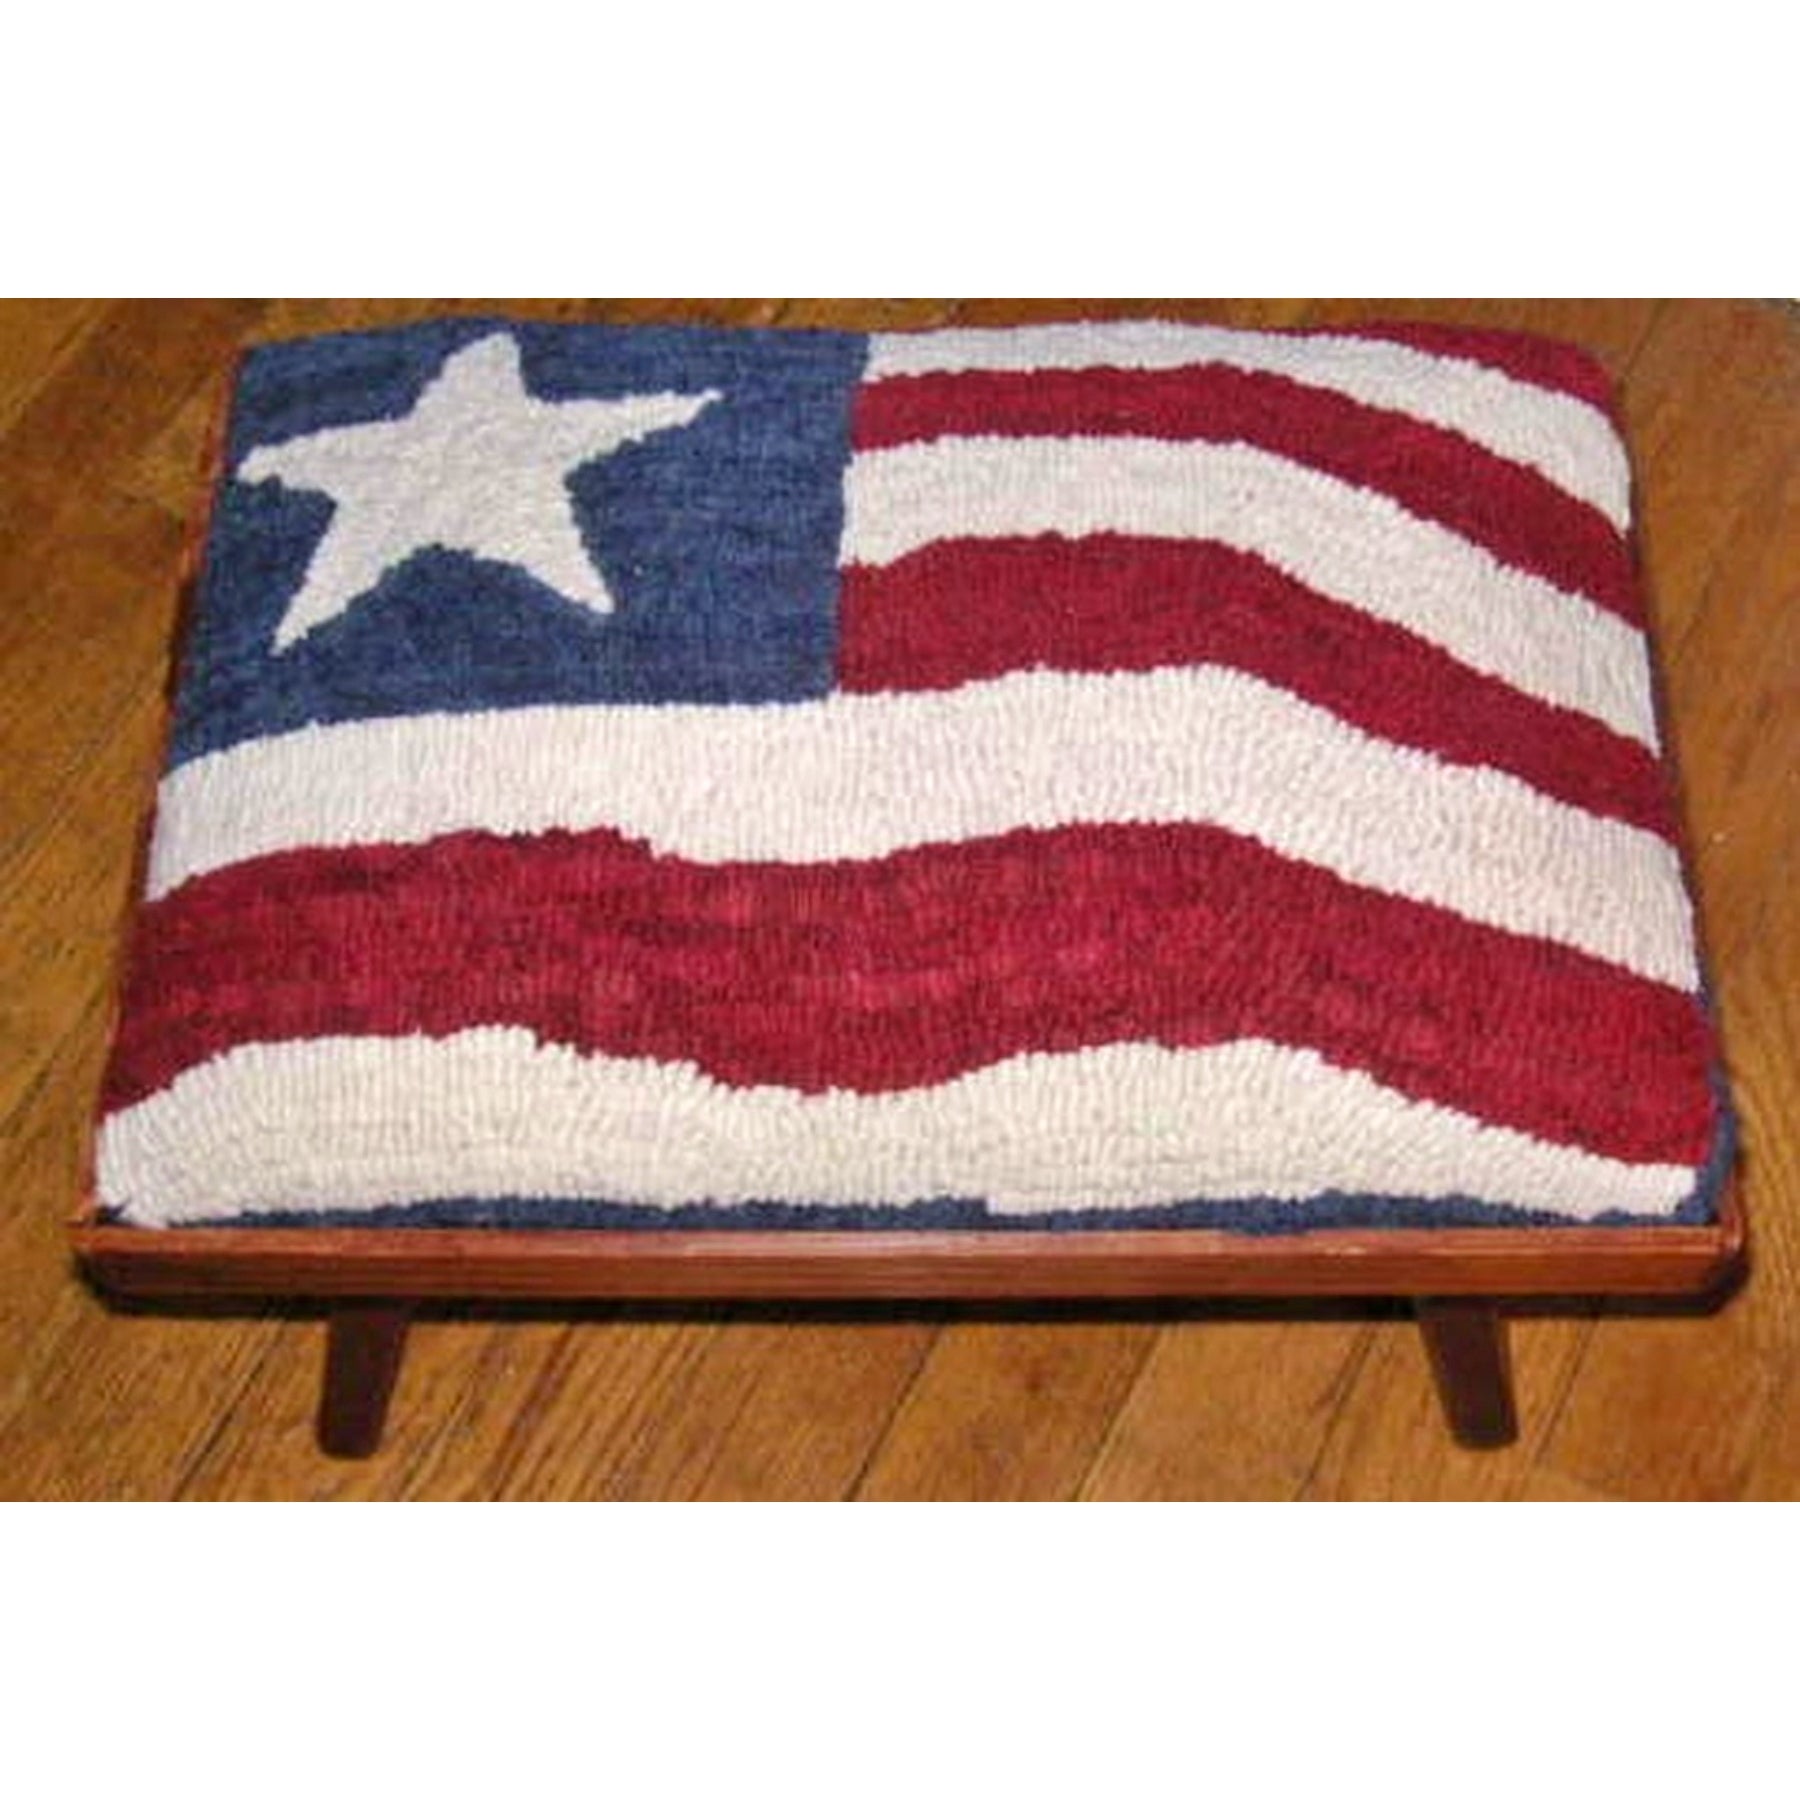 Flag - Country Footstool Pattern, rug hooked by Carolyn Cooke